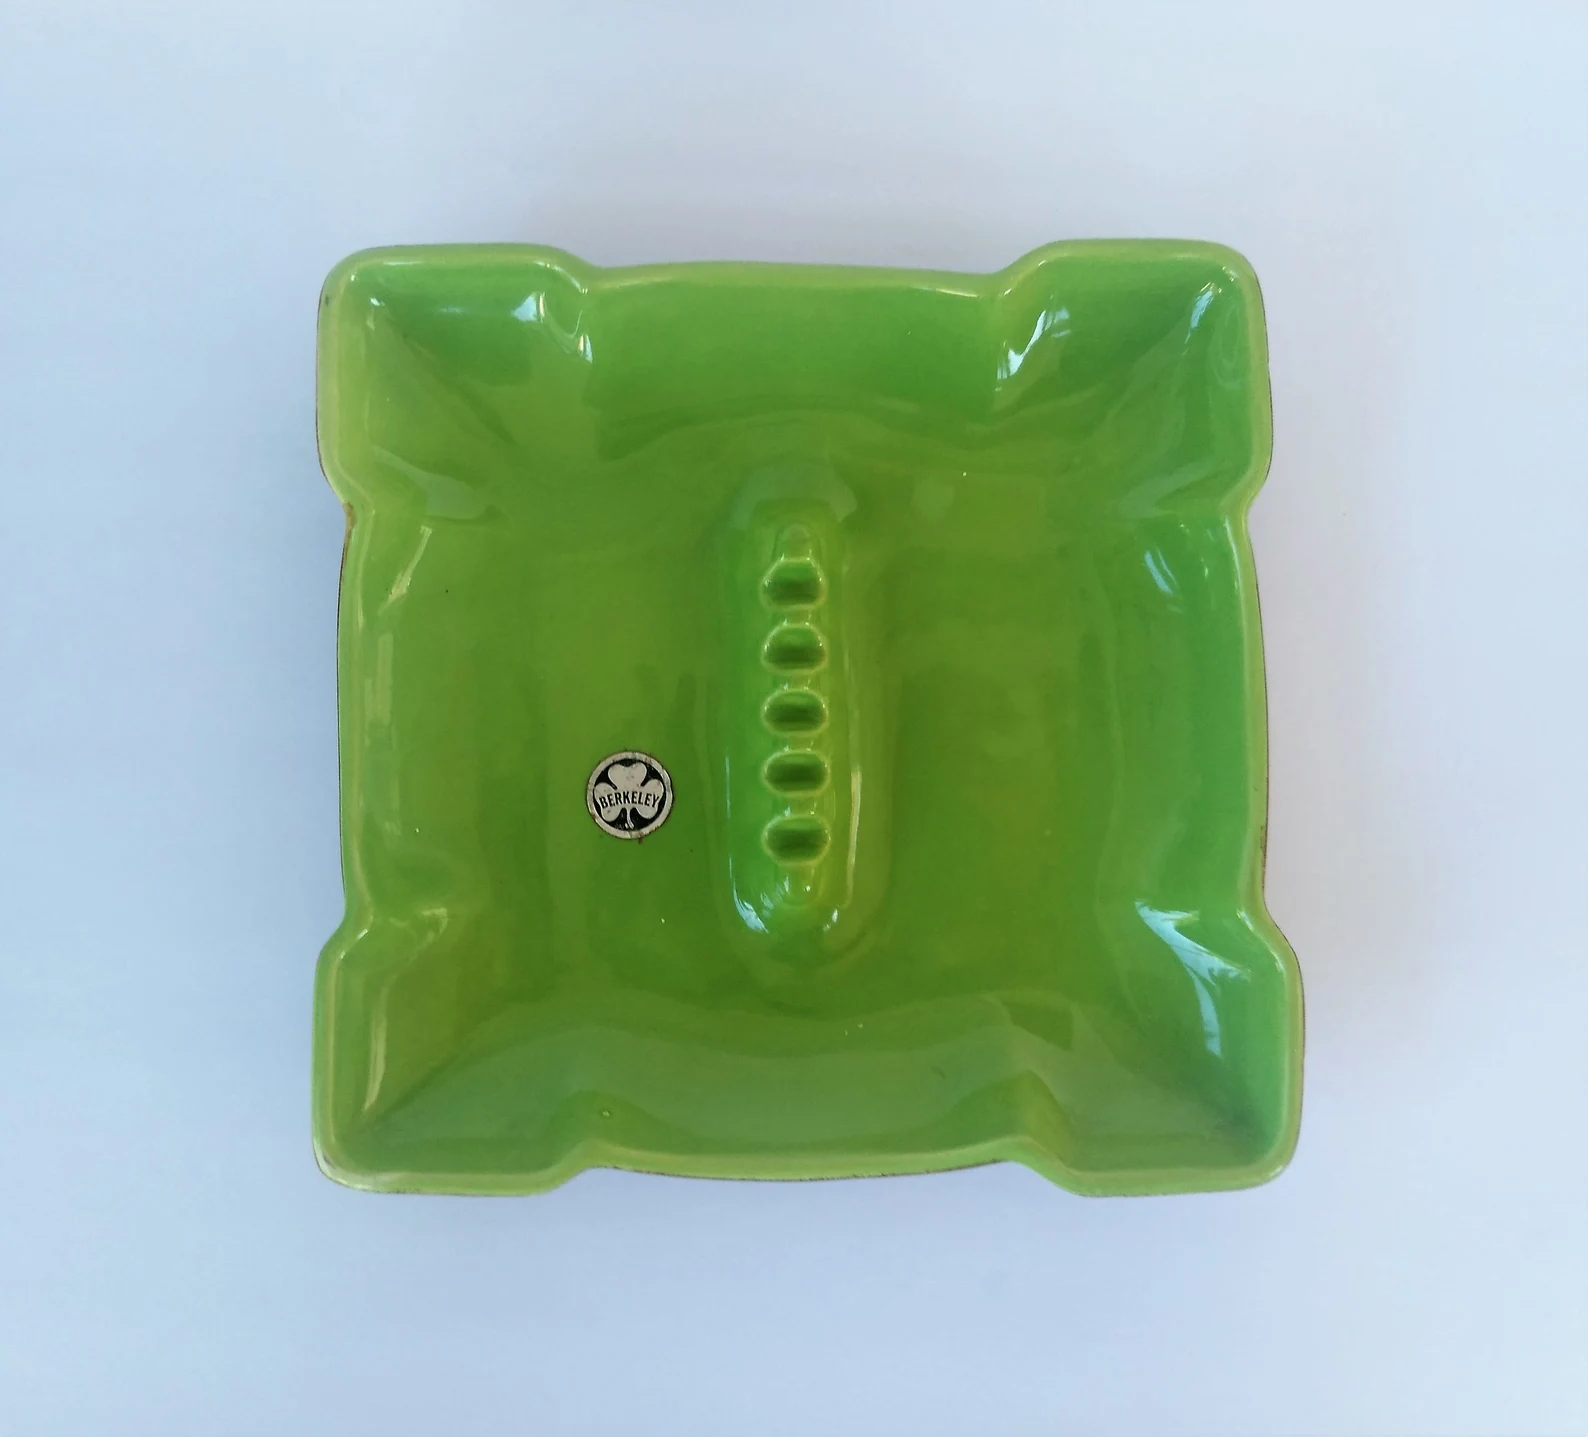 A-vintage-green-ceramic-ashtray-with-original-brand-lable-sits-on-a-white-background.